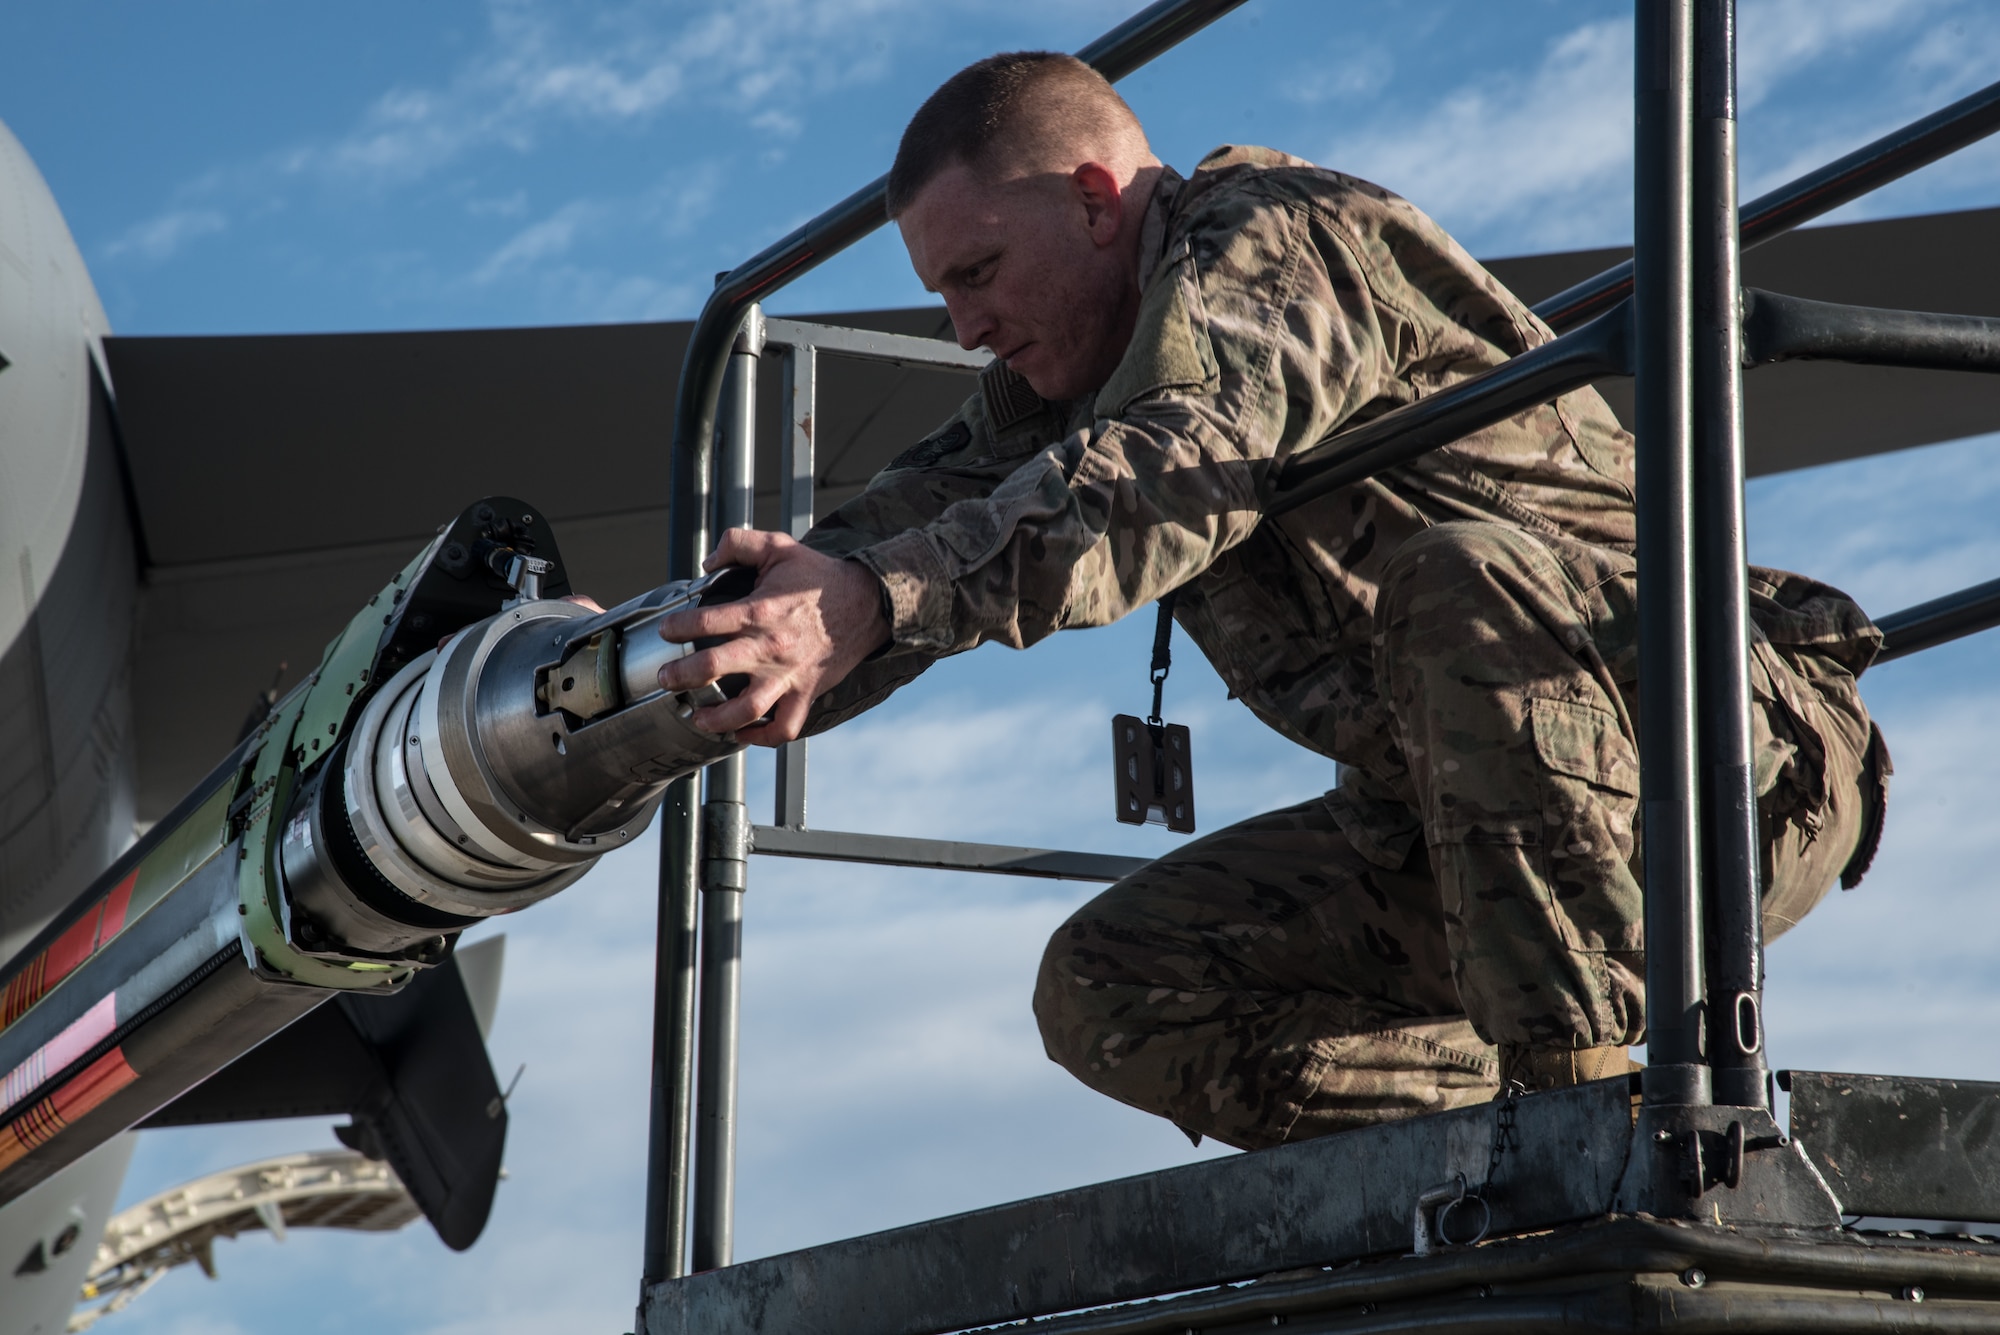 Master Sgt. Chris Hughes, 22nd Maintenance Squadron hydraulics craftsman, performs an acceptance inspection on a KC-46A Pegasus boom Feb. 14, 2019, at McConnell Air Force Base, Kan. Hydraulics Airmen are responsible for internal repairs, which can include fuel supply, electrical, mechanical and hydraulics systems of the aircraft. (U.S. Air Force photo by Airman 1st Class Alan Ricker)